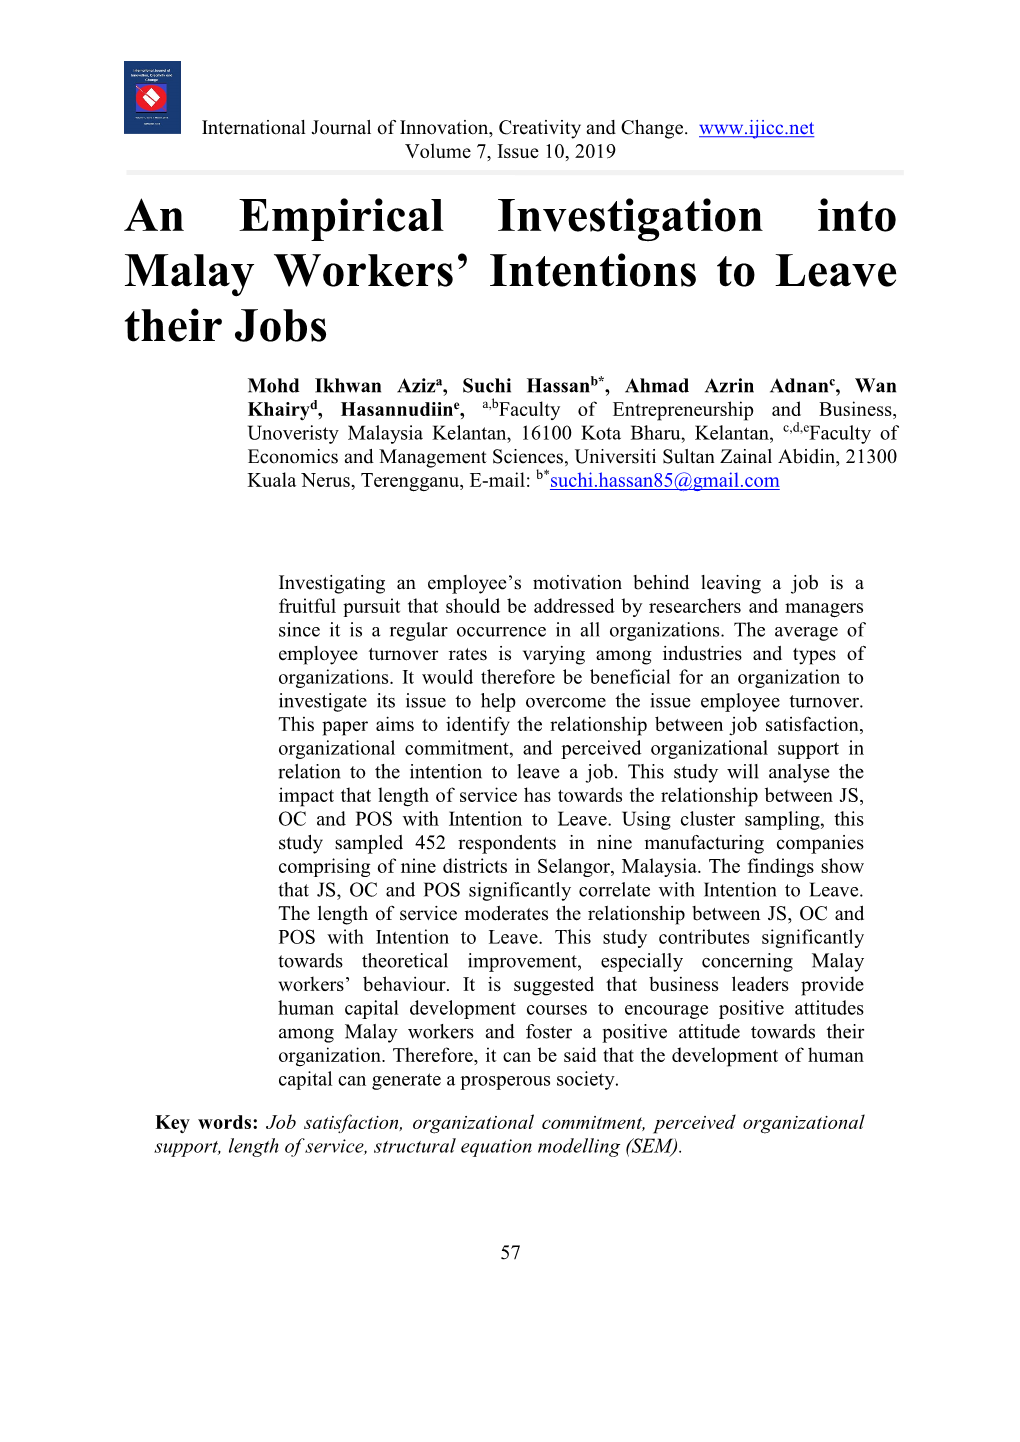 An Empirical Investigation Into Malay Workers' Intentions to Leave Their